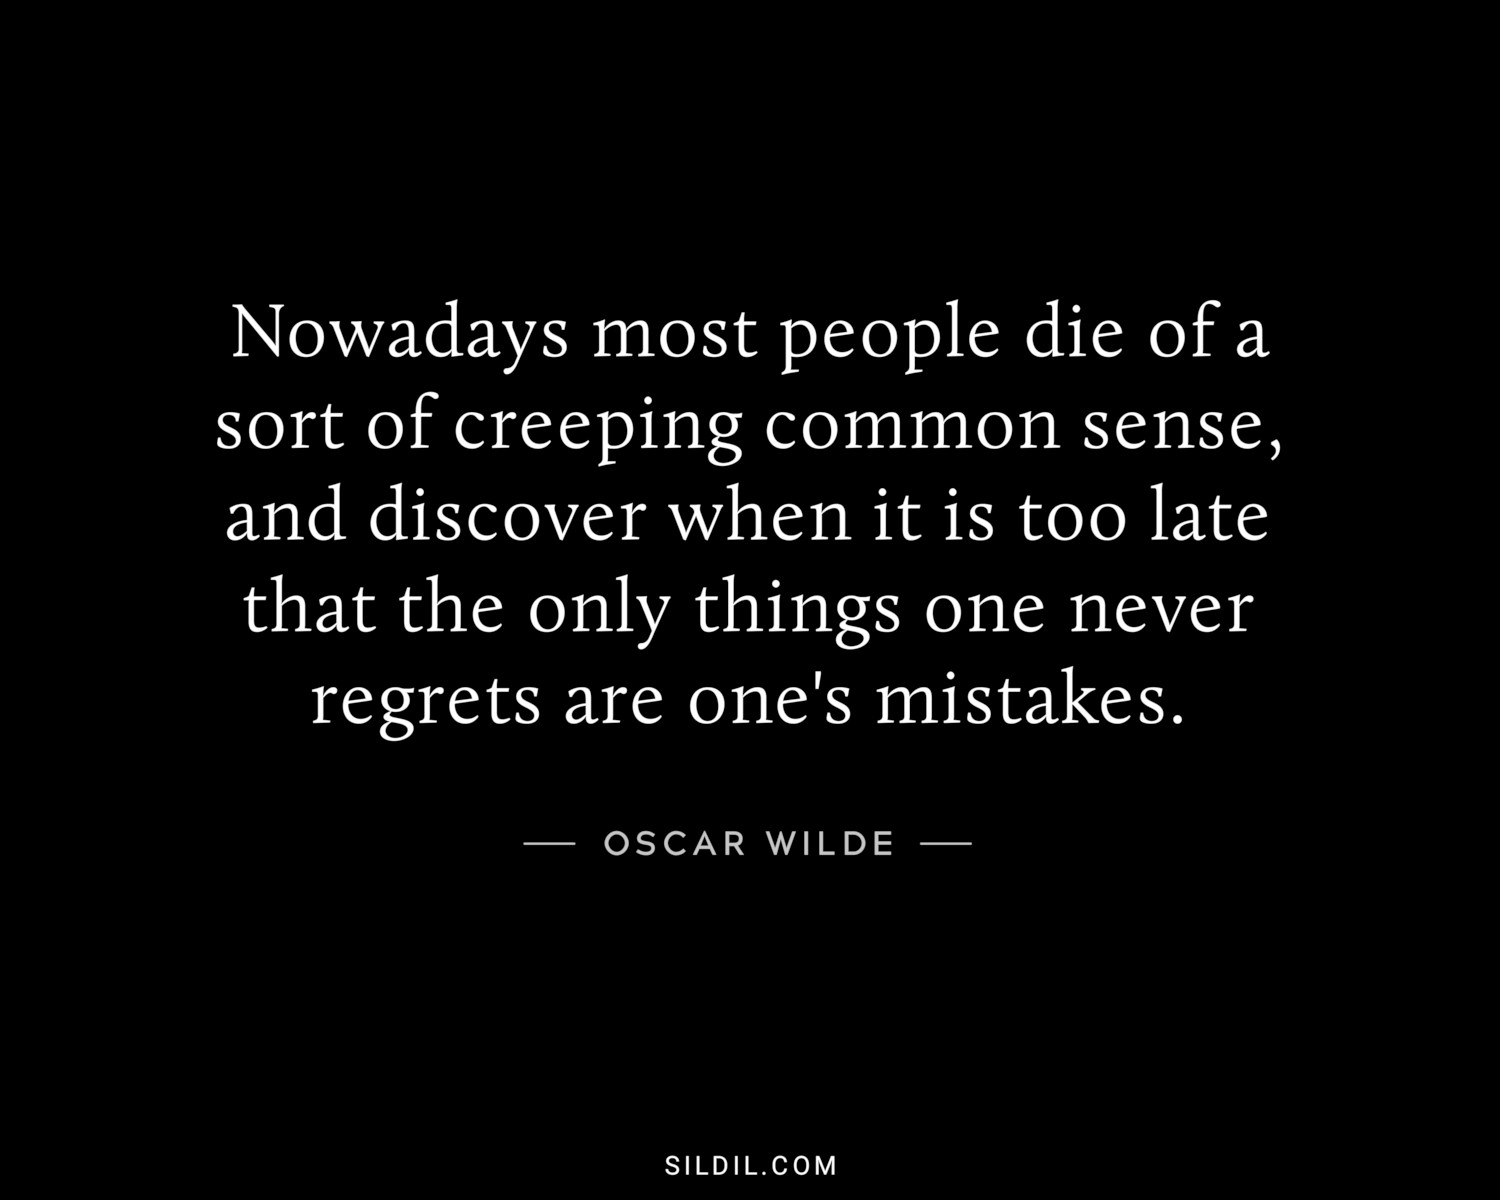 Nowadays most people die of a sort of creeping common sense, and discover when it is too late that the only things one never regrets are one's mistakes.